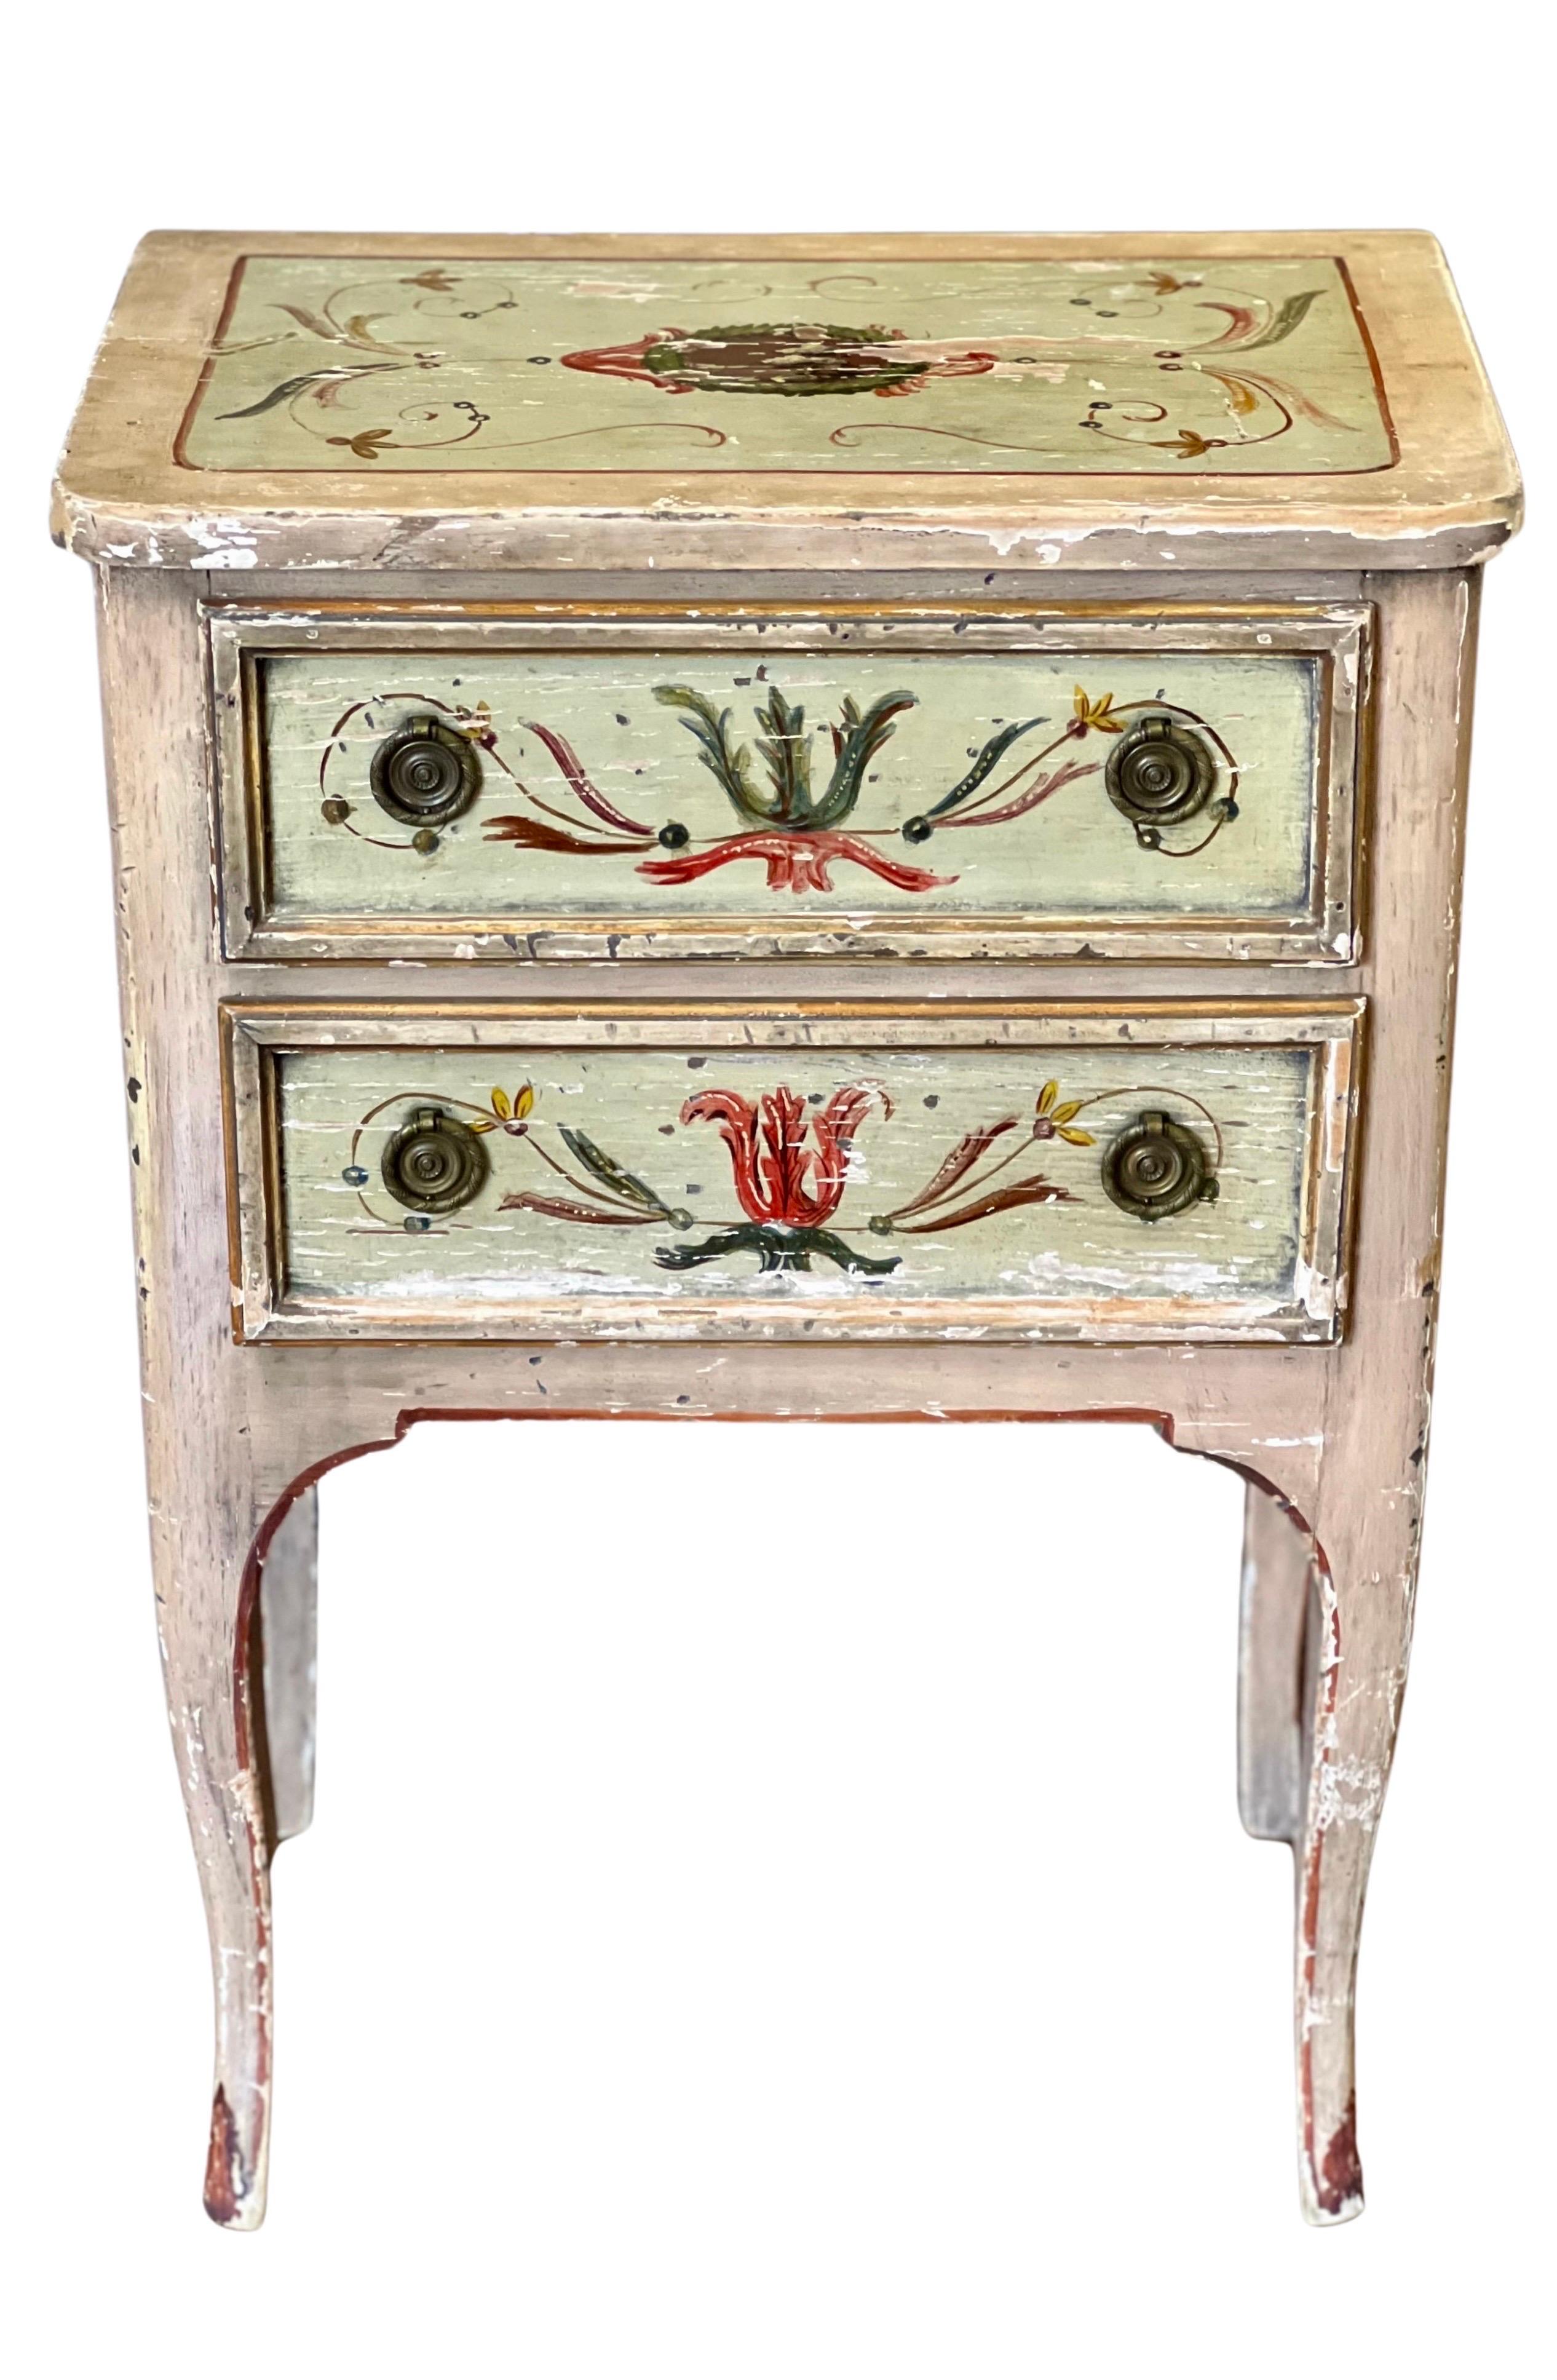 Antique Italian Neoclassical style small commode or stand, c. 19th century.

Gorgeous petite chest with a cheerful and vivid, hand-painted Venetian design of scrolling foliate motifs. The base colors of cream and pale green have accents in shades of